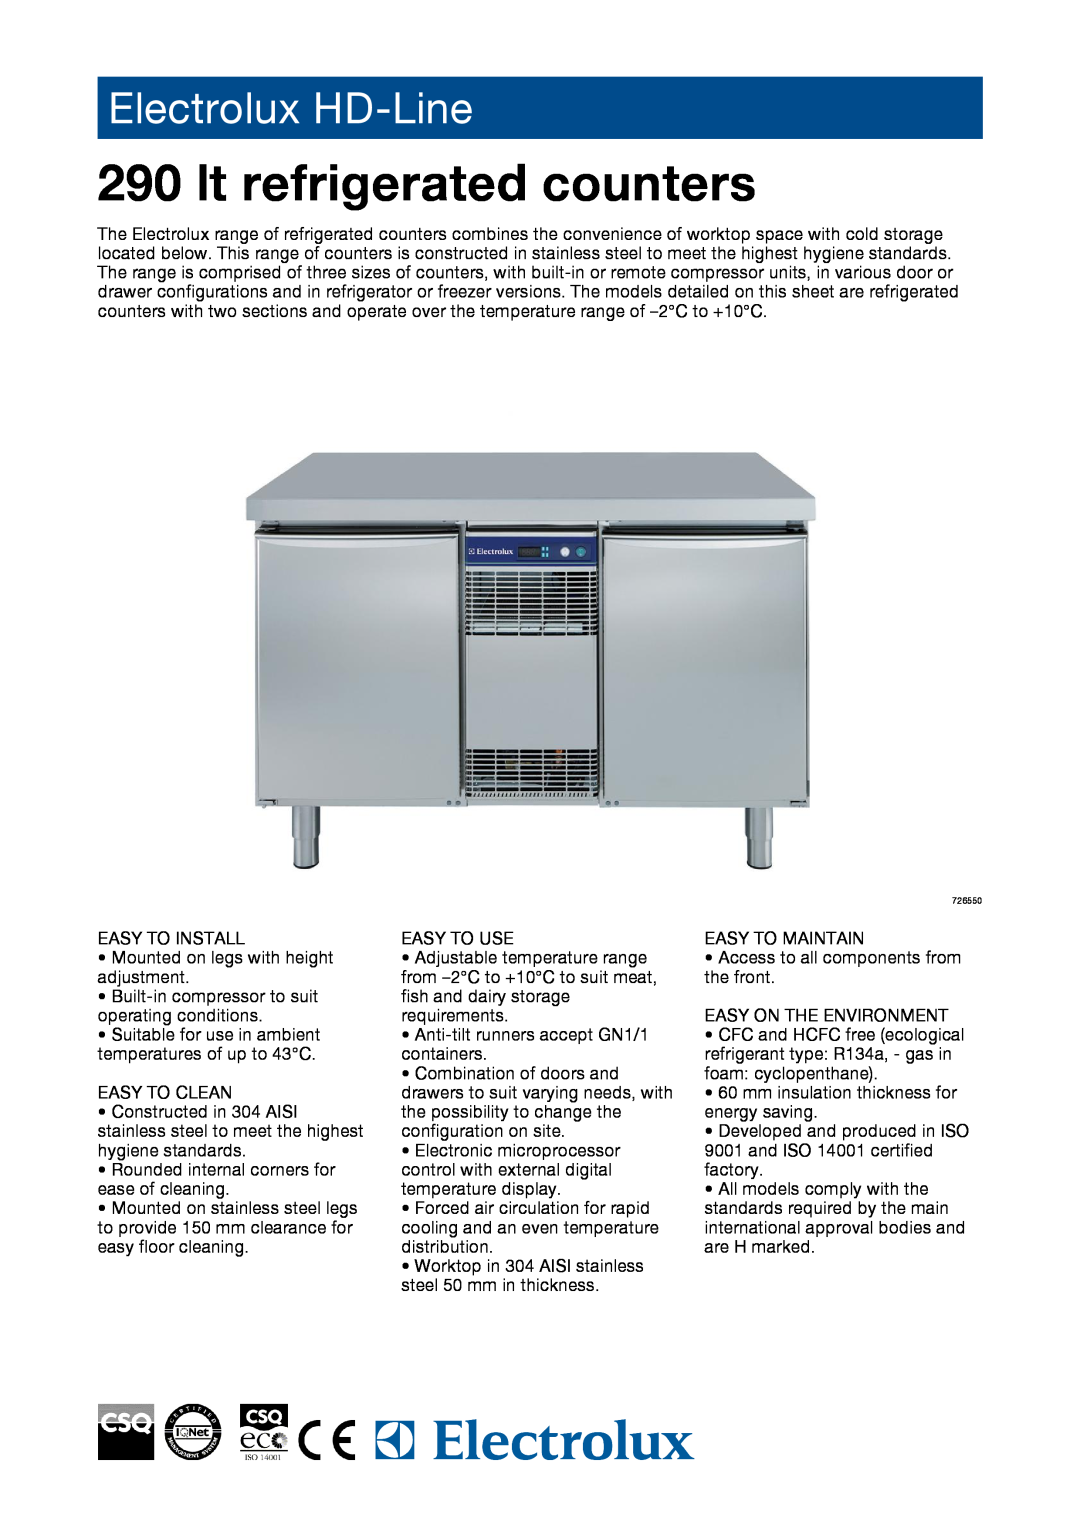 Electrolux 727074, 726551, 726552, 726550, 727075, RCDR2M12, RCDR2M04 manual lt refrigerated counters, Electrolux HD-Line 